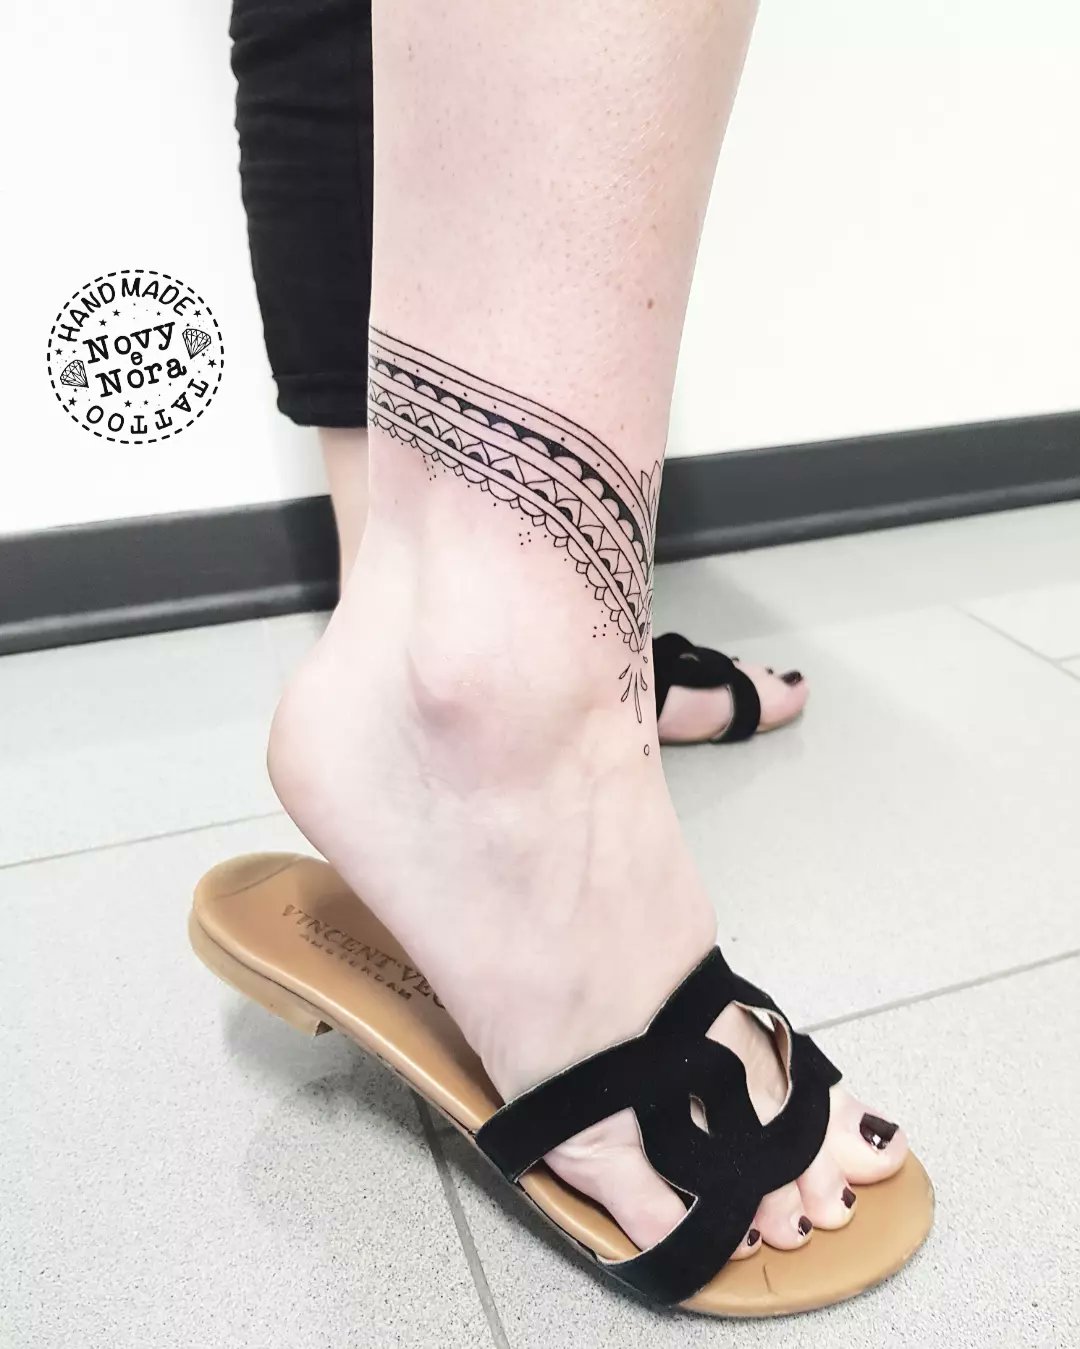 Ankle bracelet with the initials of... - Rowena's Tattoo Art | Facebook